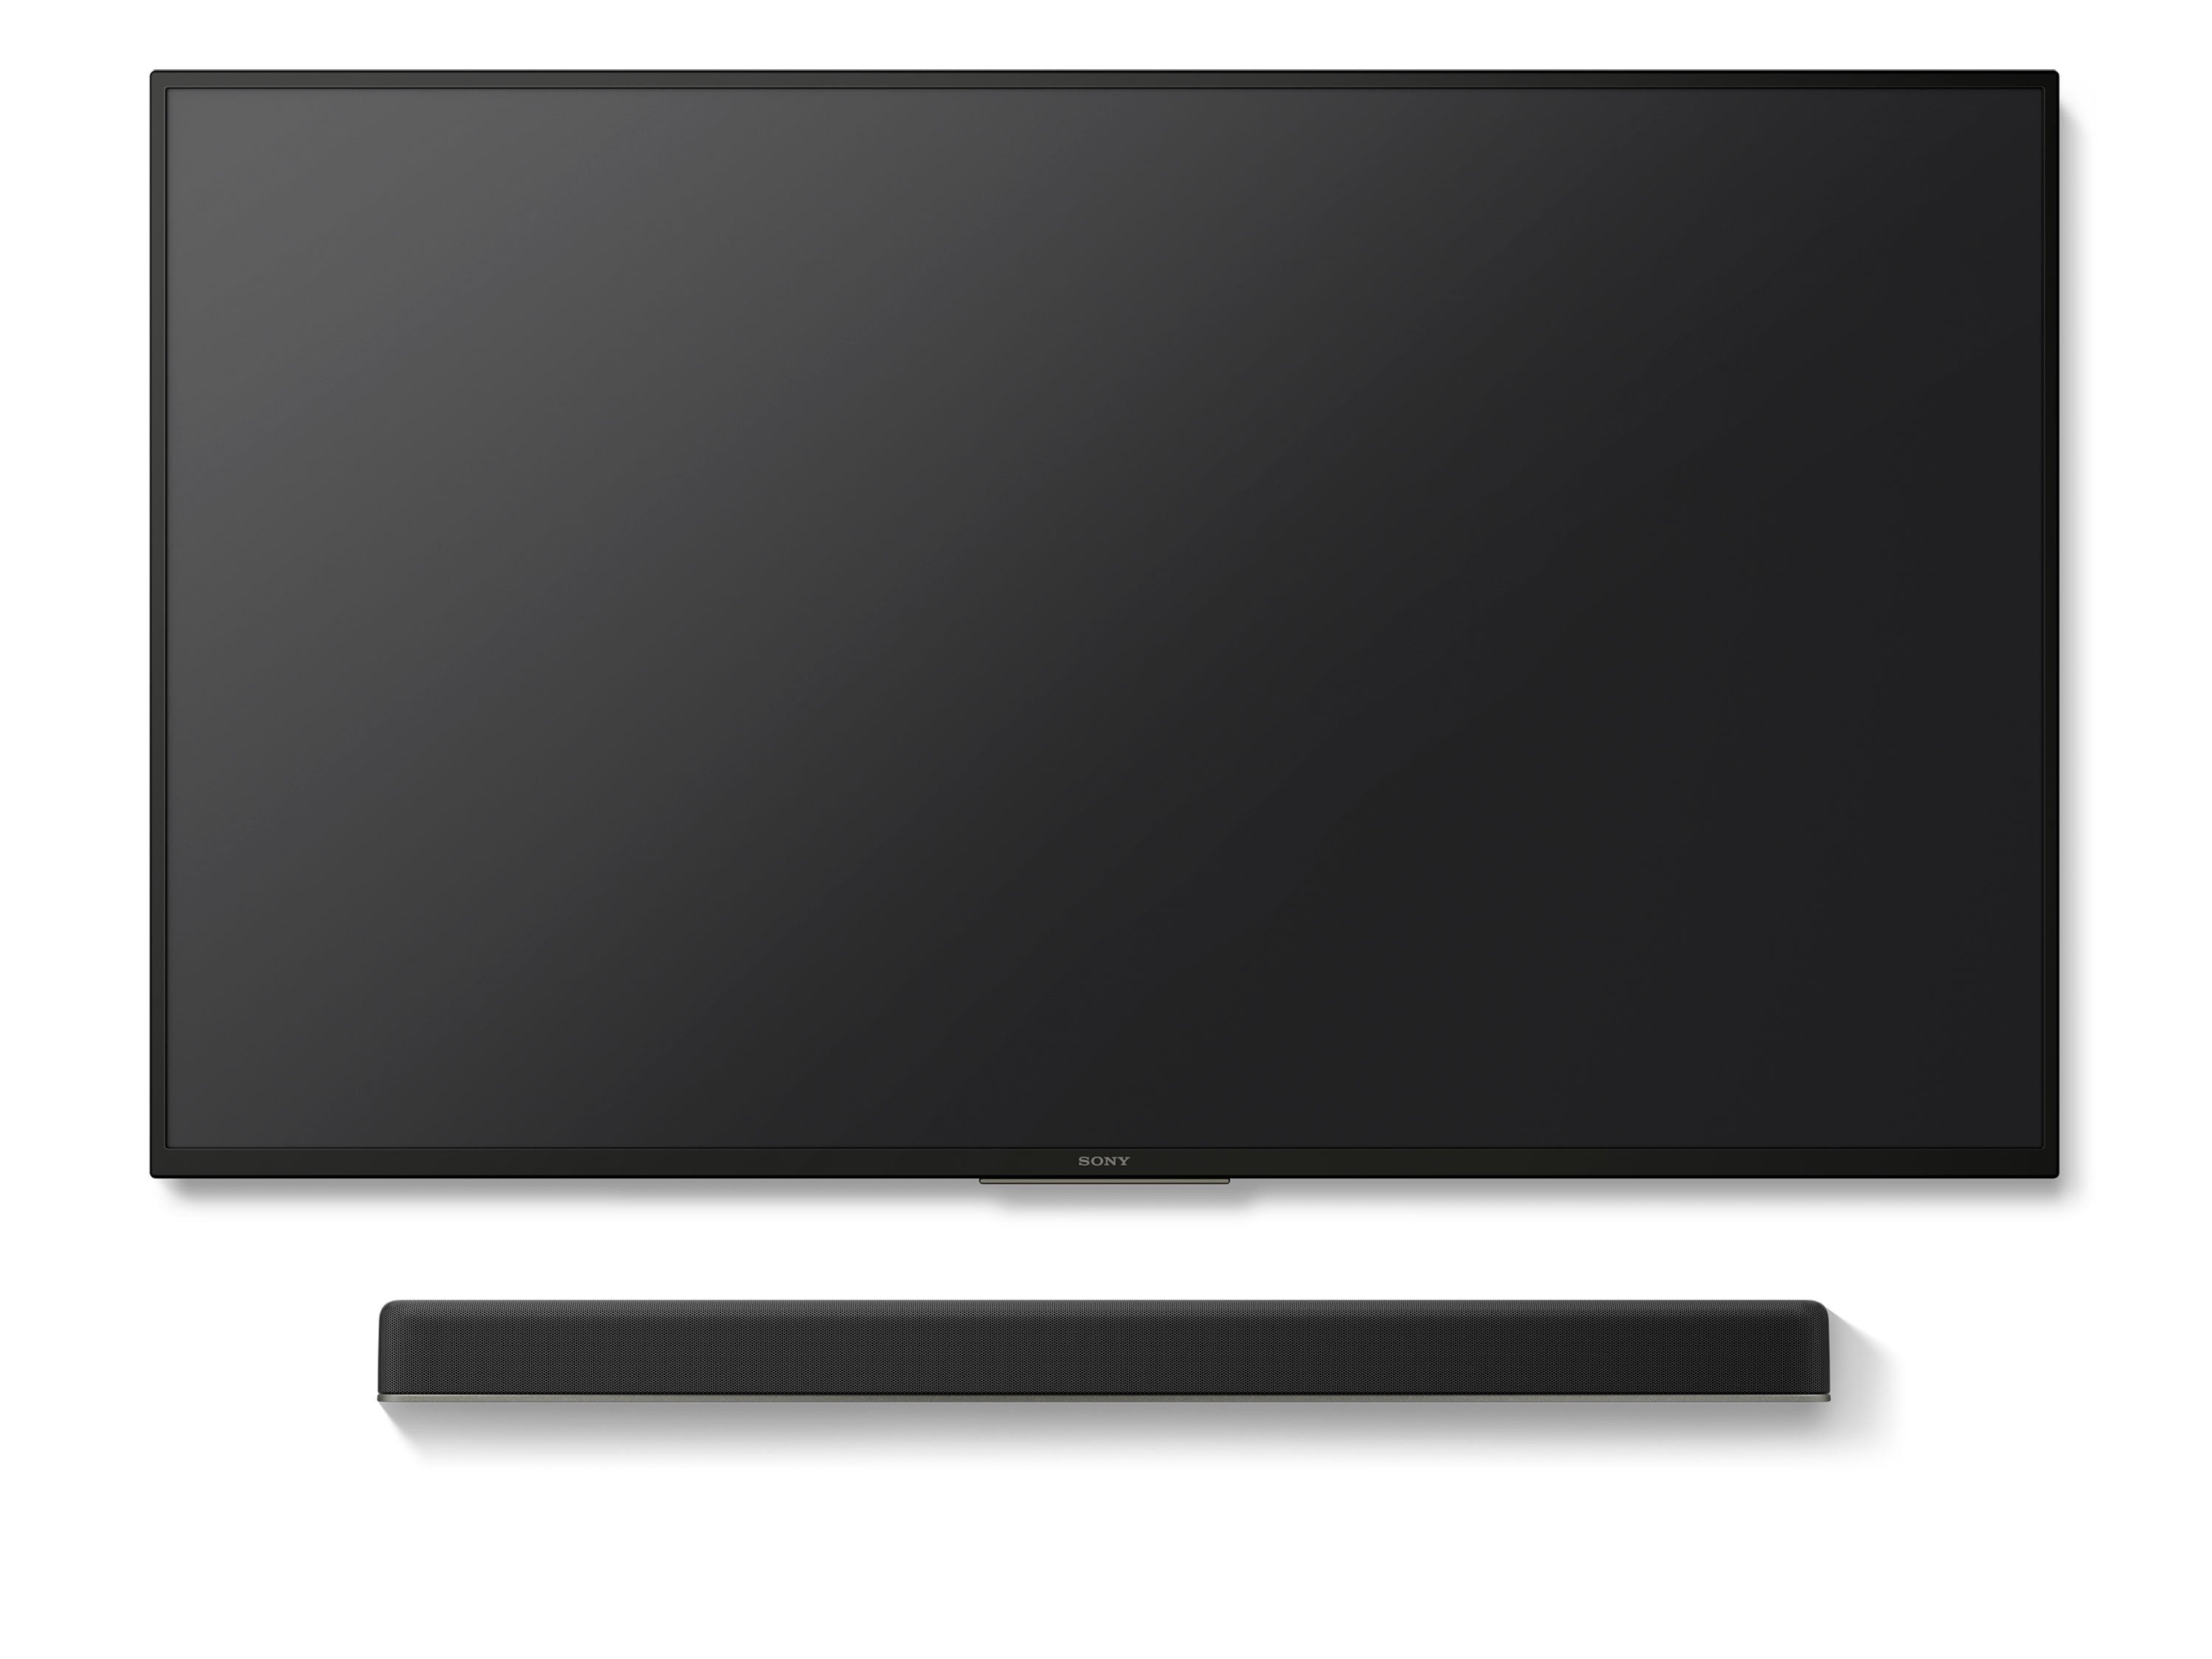 SONY 2.1CH Atmos Soundbar with Built-In Subwoofer - HTX8500 | Leon's